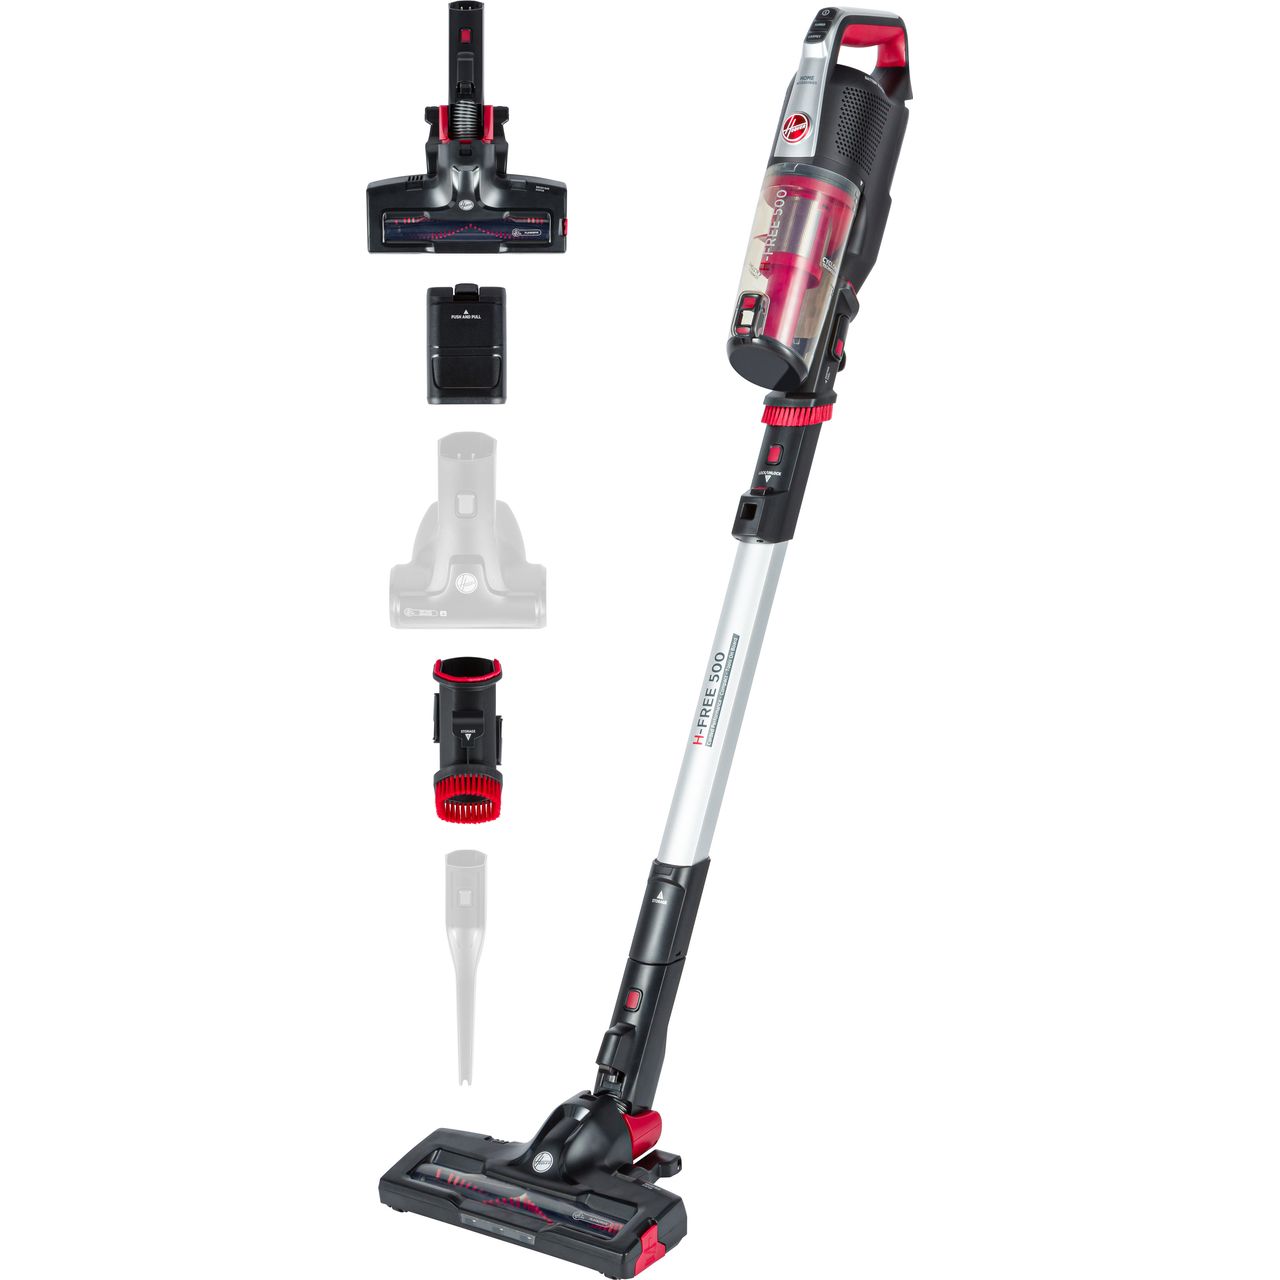 Hoover H-FREE 500 HF522BH Cordless Vacuum Cleaner with up to 40 Minutes Run Time Review